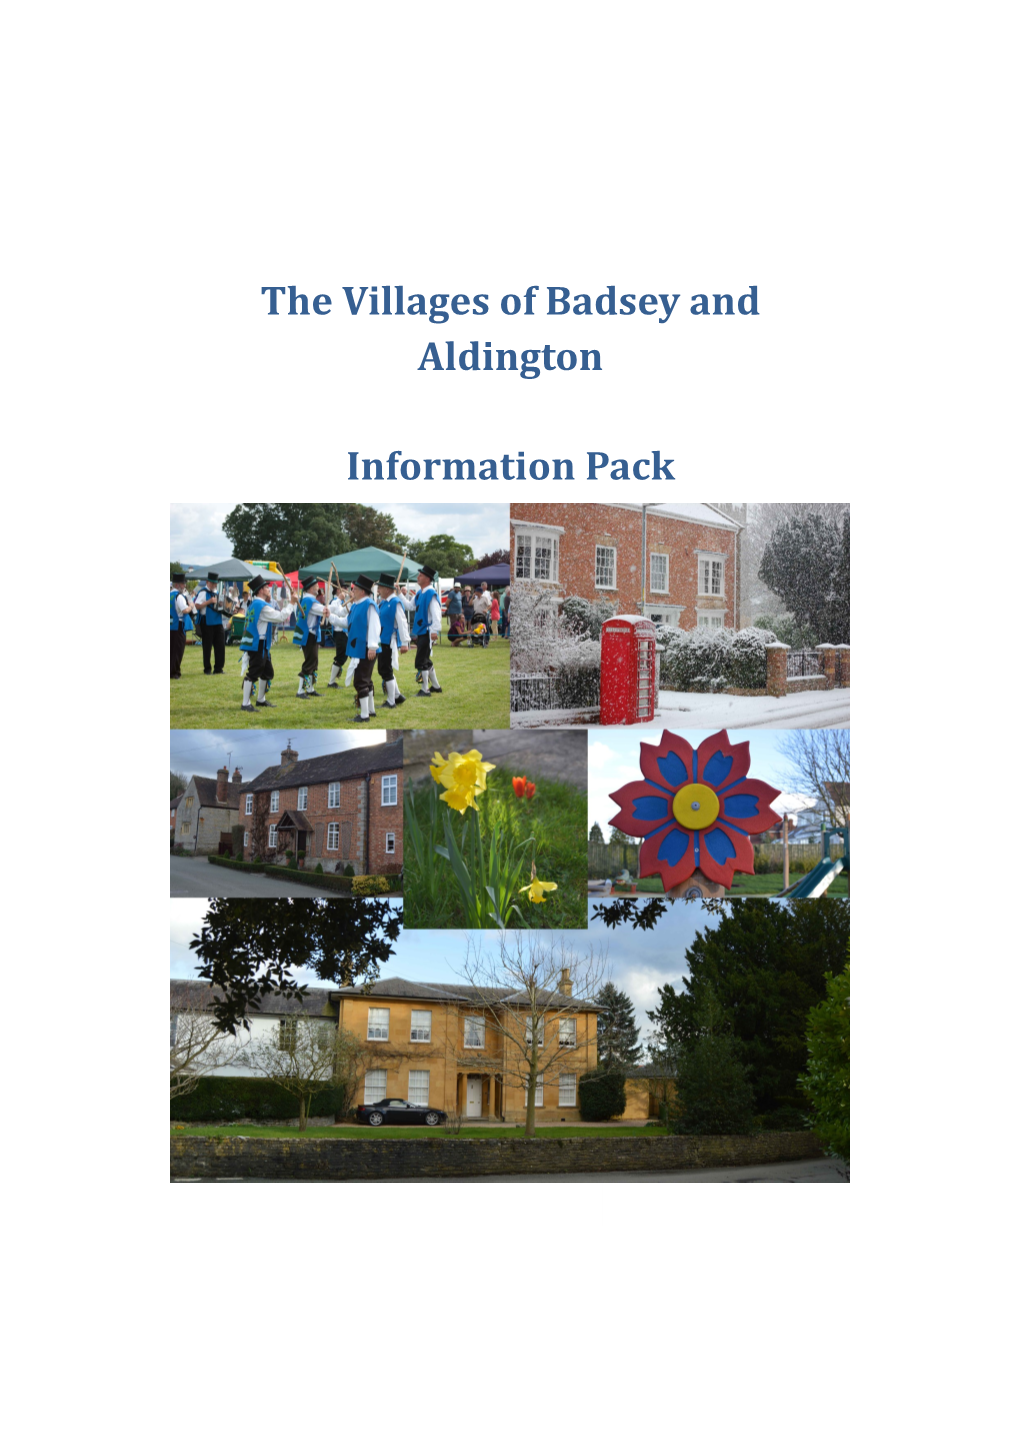 The Villages of Badsey and Aldington Information Pack